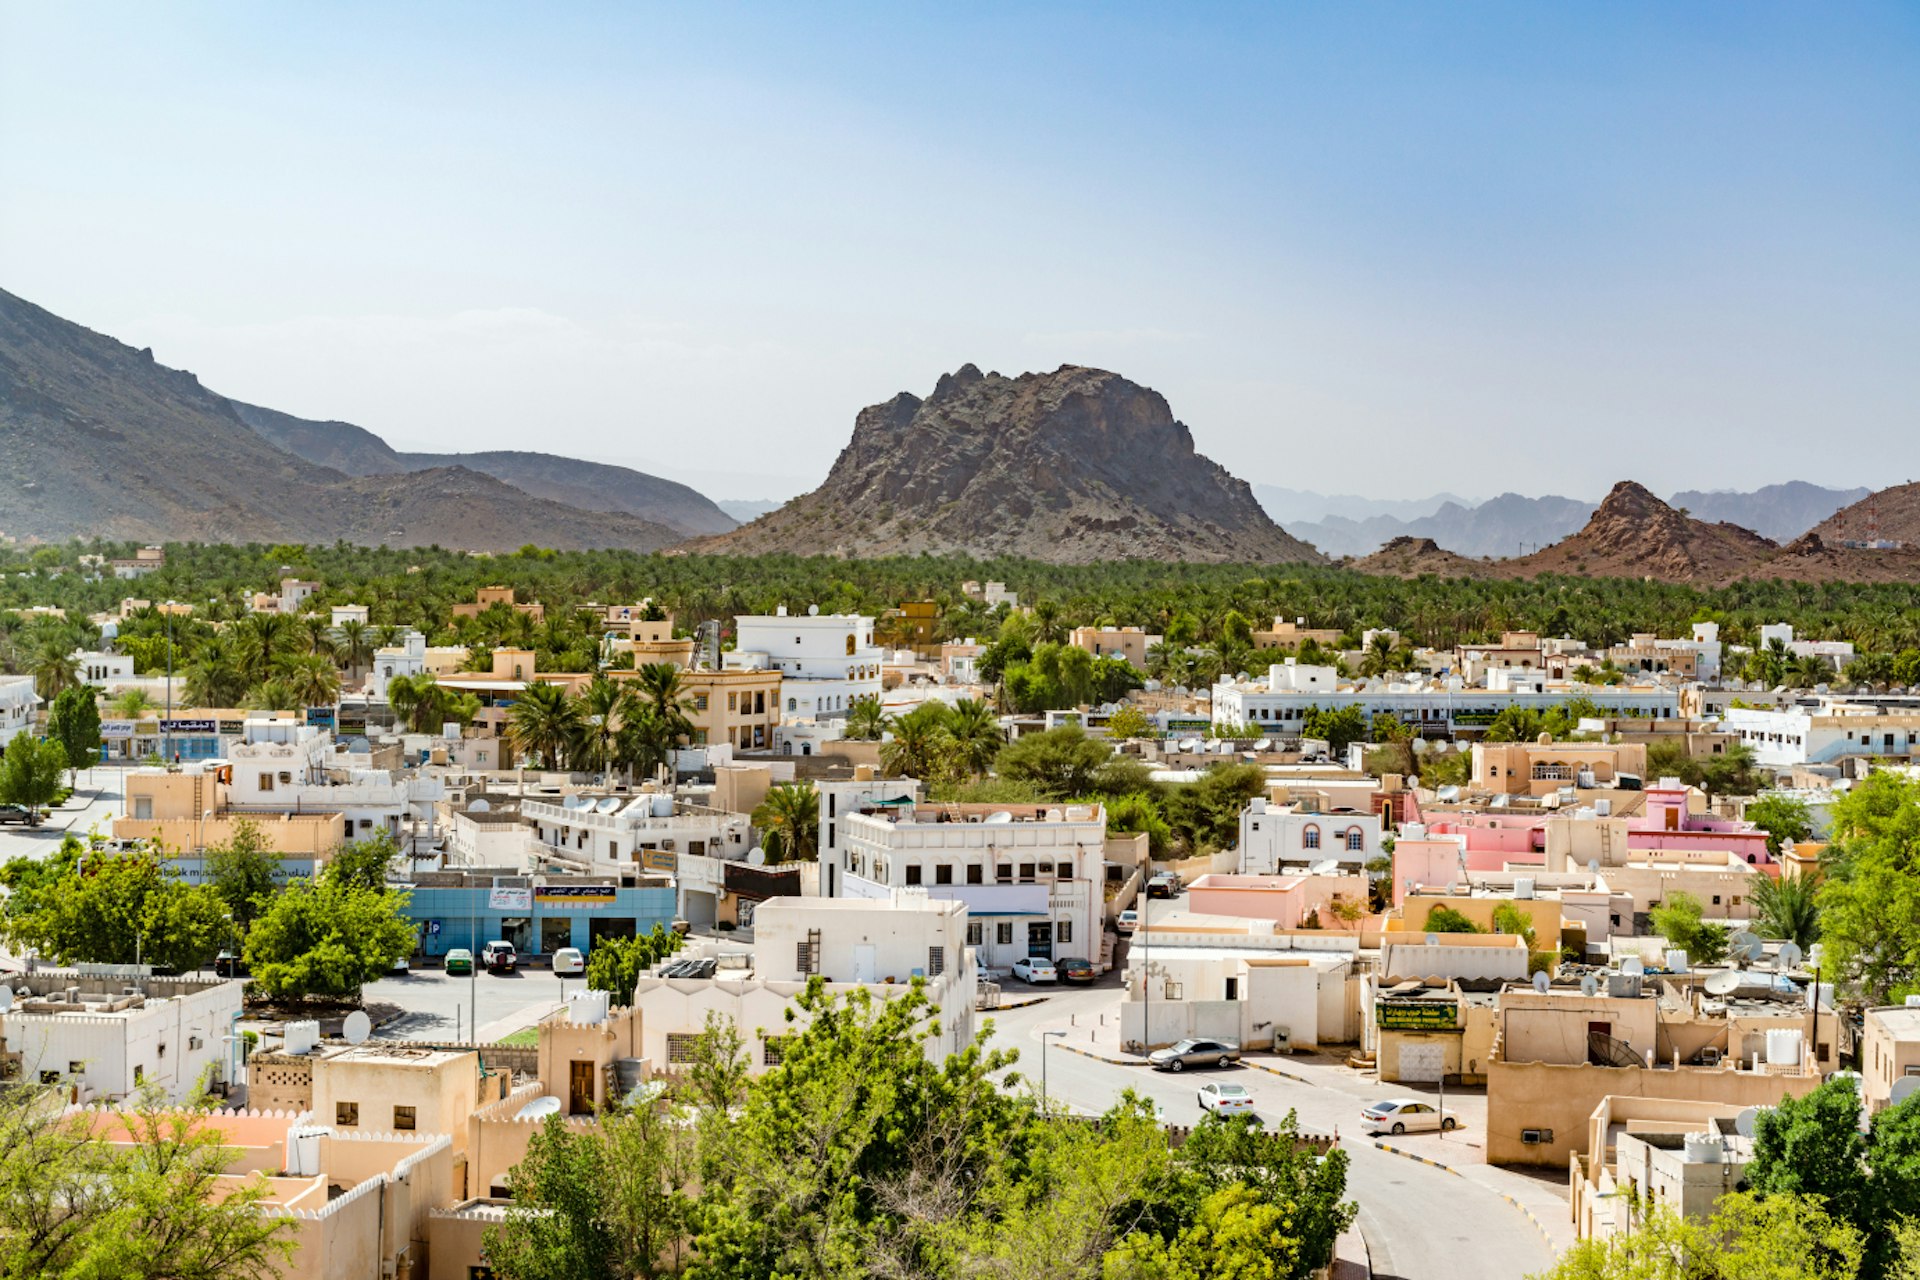 Arabian oasis town at Rustaq Fort in Al Batinah Region, Oman. It is located about 175 km to the southwest of Muscat, the capital of Oman.